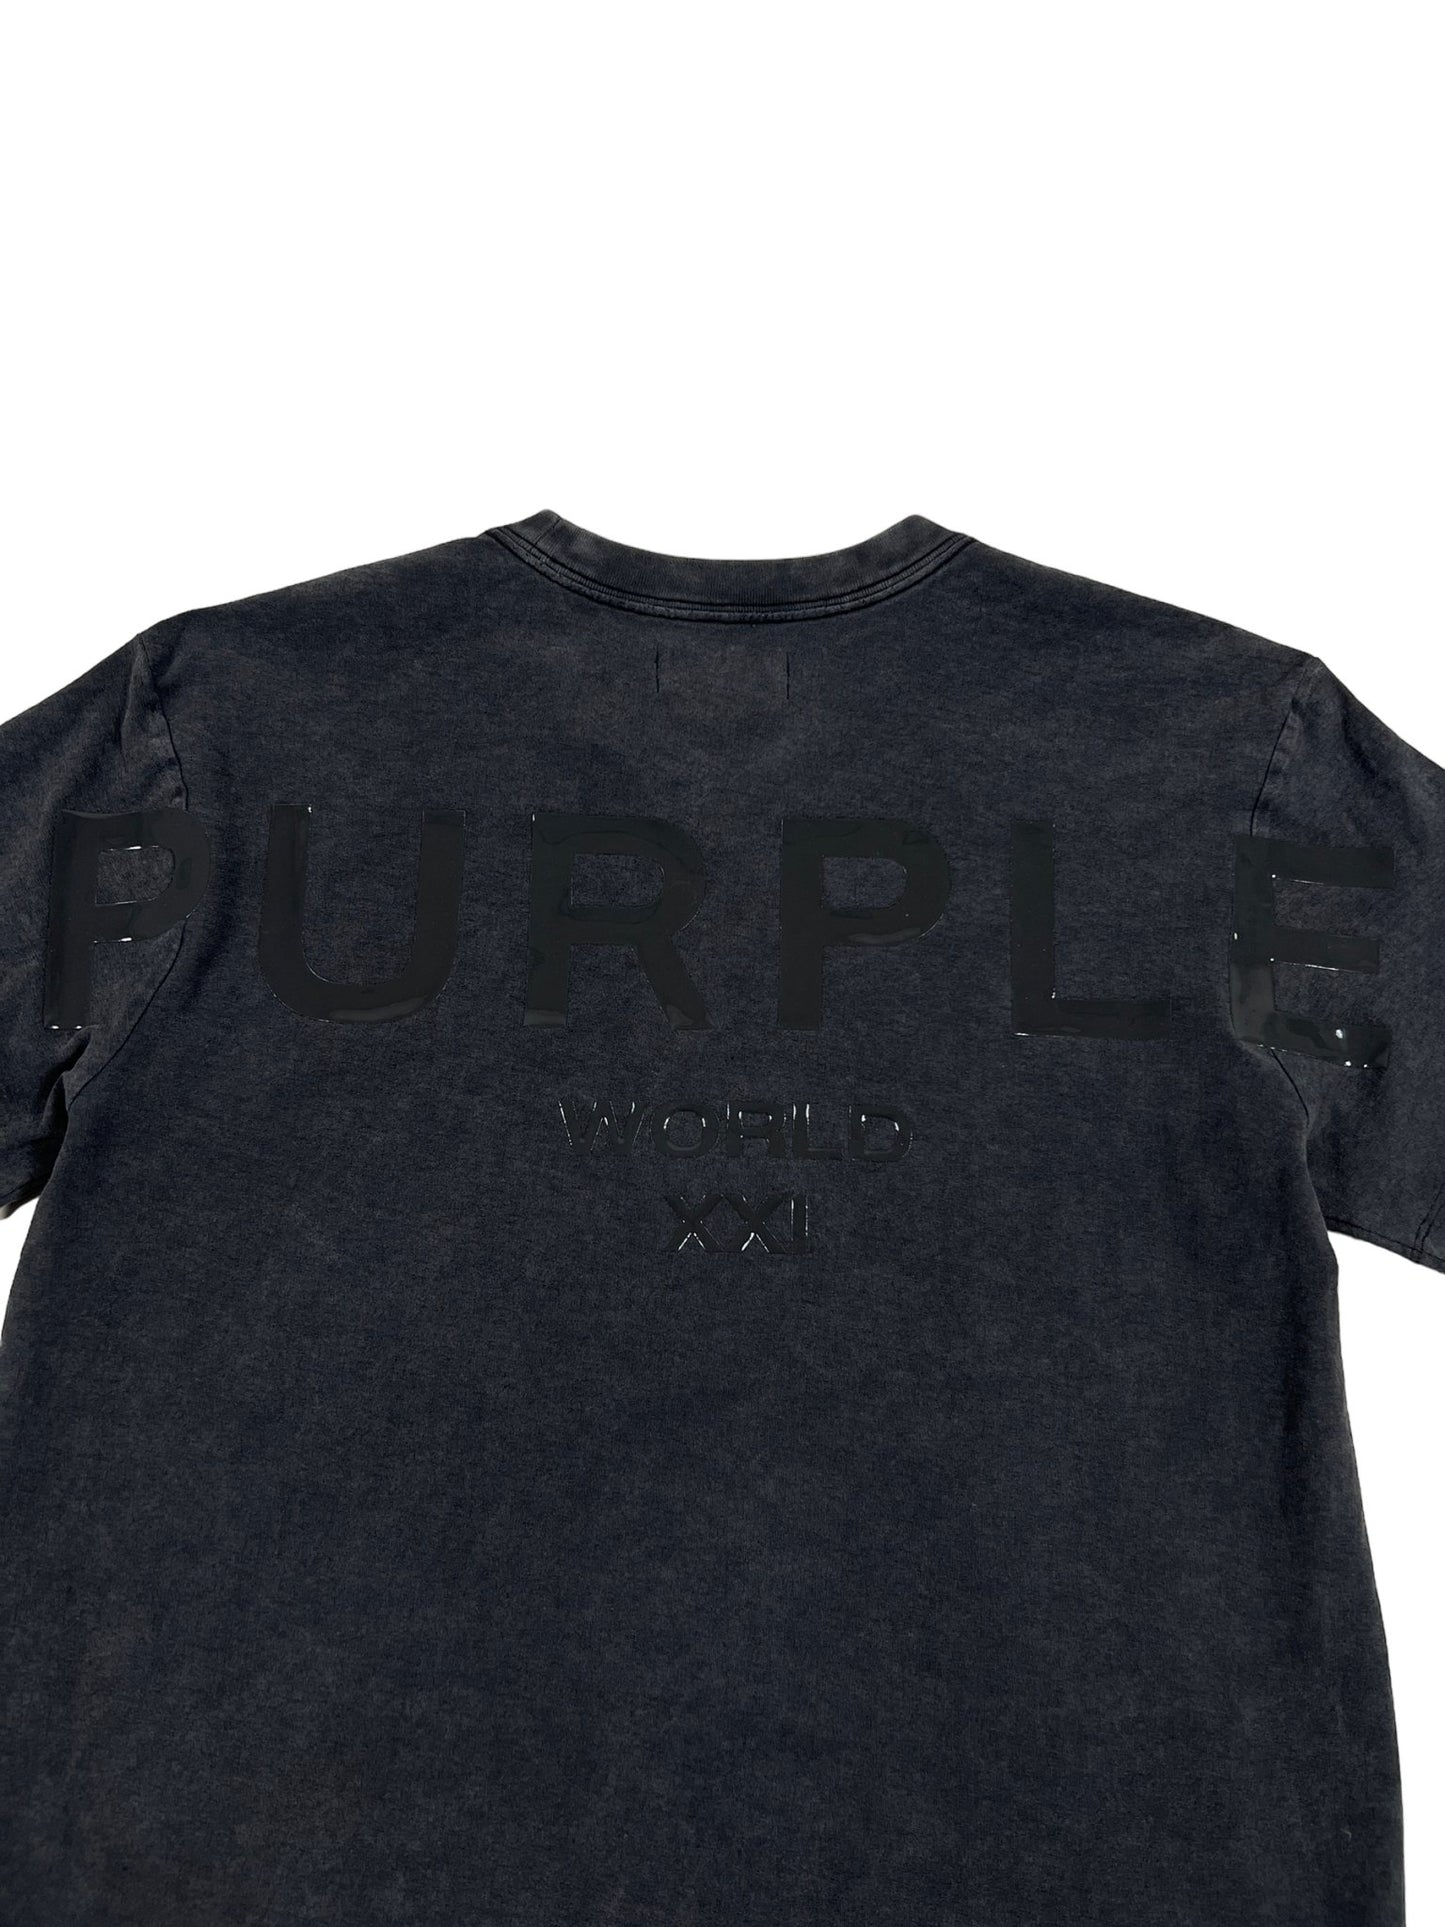 A black textured jersey short sleeve tee from PURPLE BRAND with the word "purple" in raised letters and "world xxi" below, displayed on a white background.